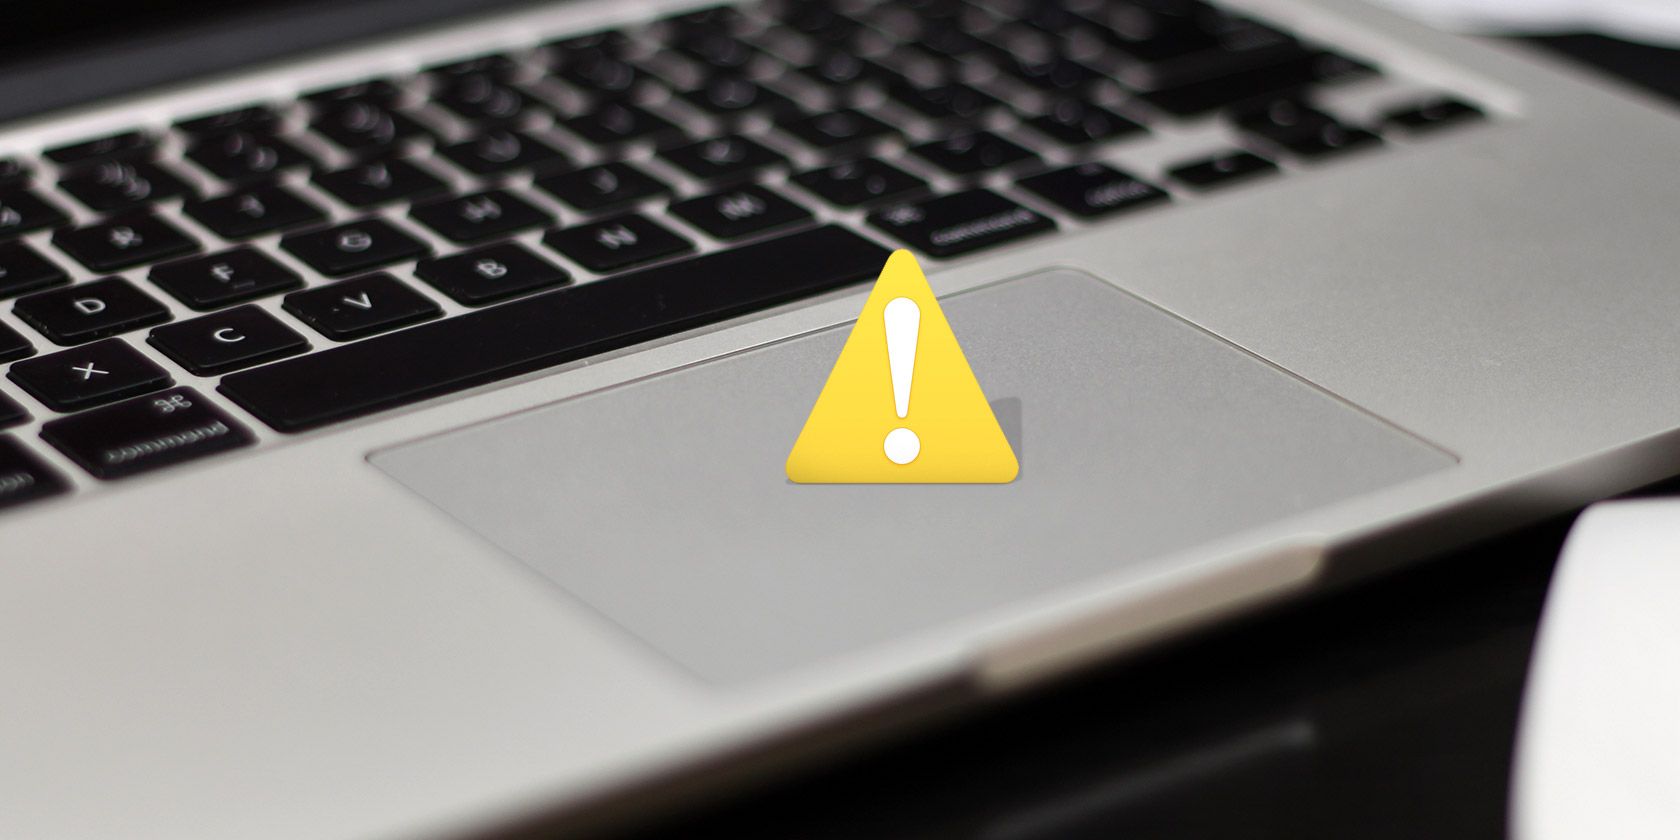 ugly invade Way MacBook Trackpad Not Working? 4 Troubleshooting Tips to Try